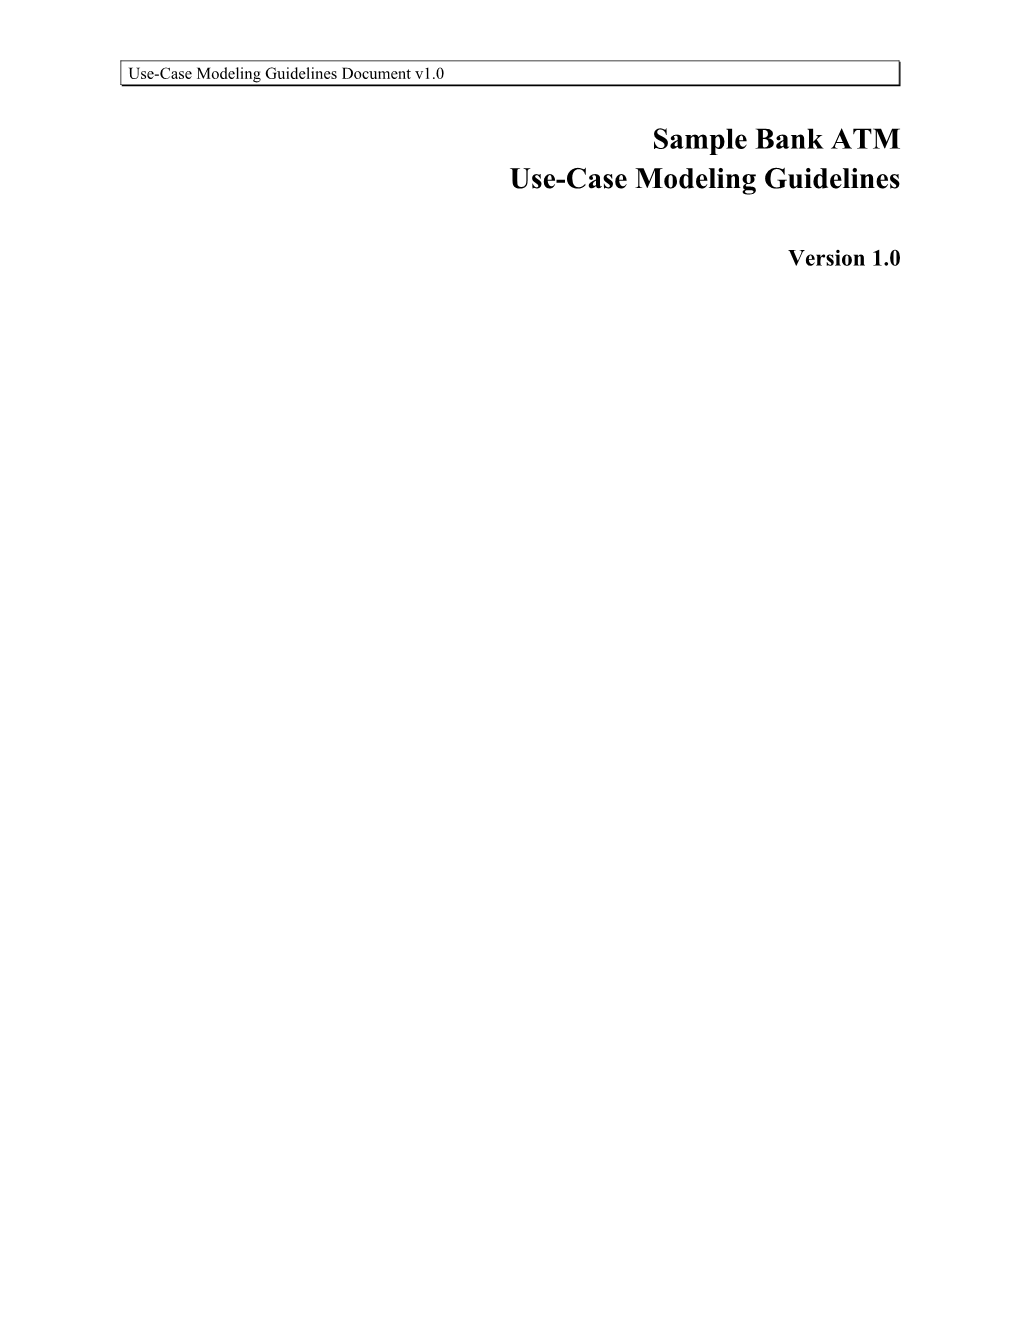 Use Case Modeling Guidelines